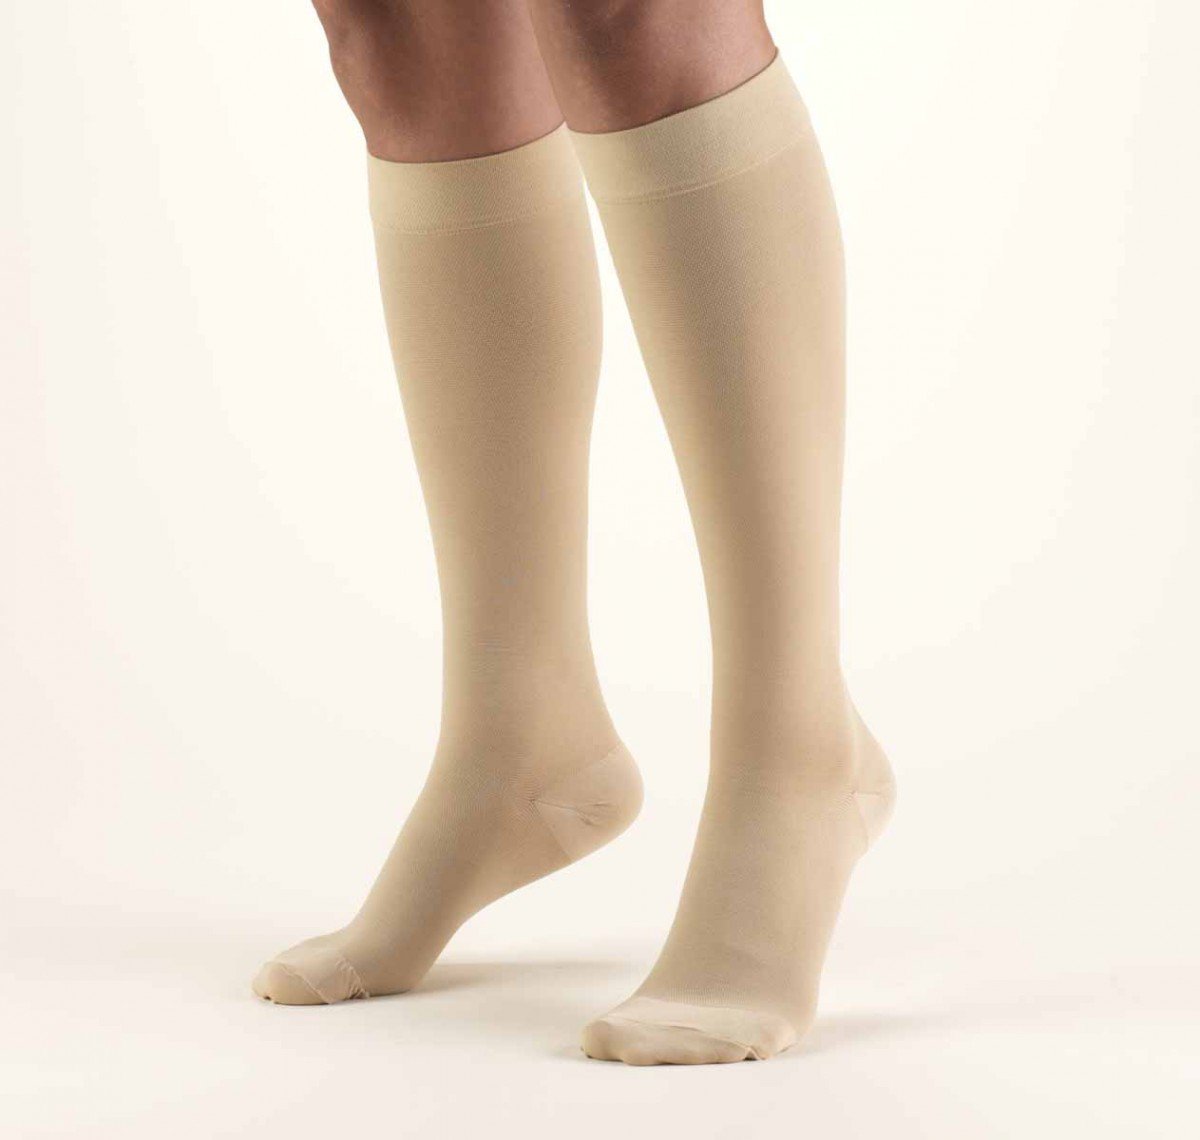 Truform Classic Medical Knee High Support Stockings Closed Toe 20 30 Mmhg 8865bl S 8865bl M